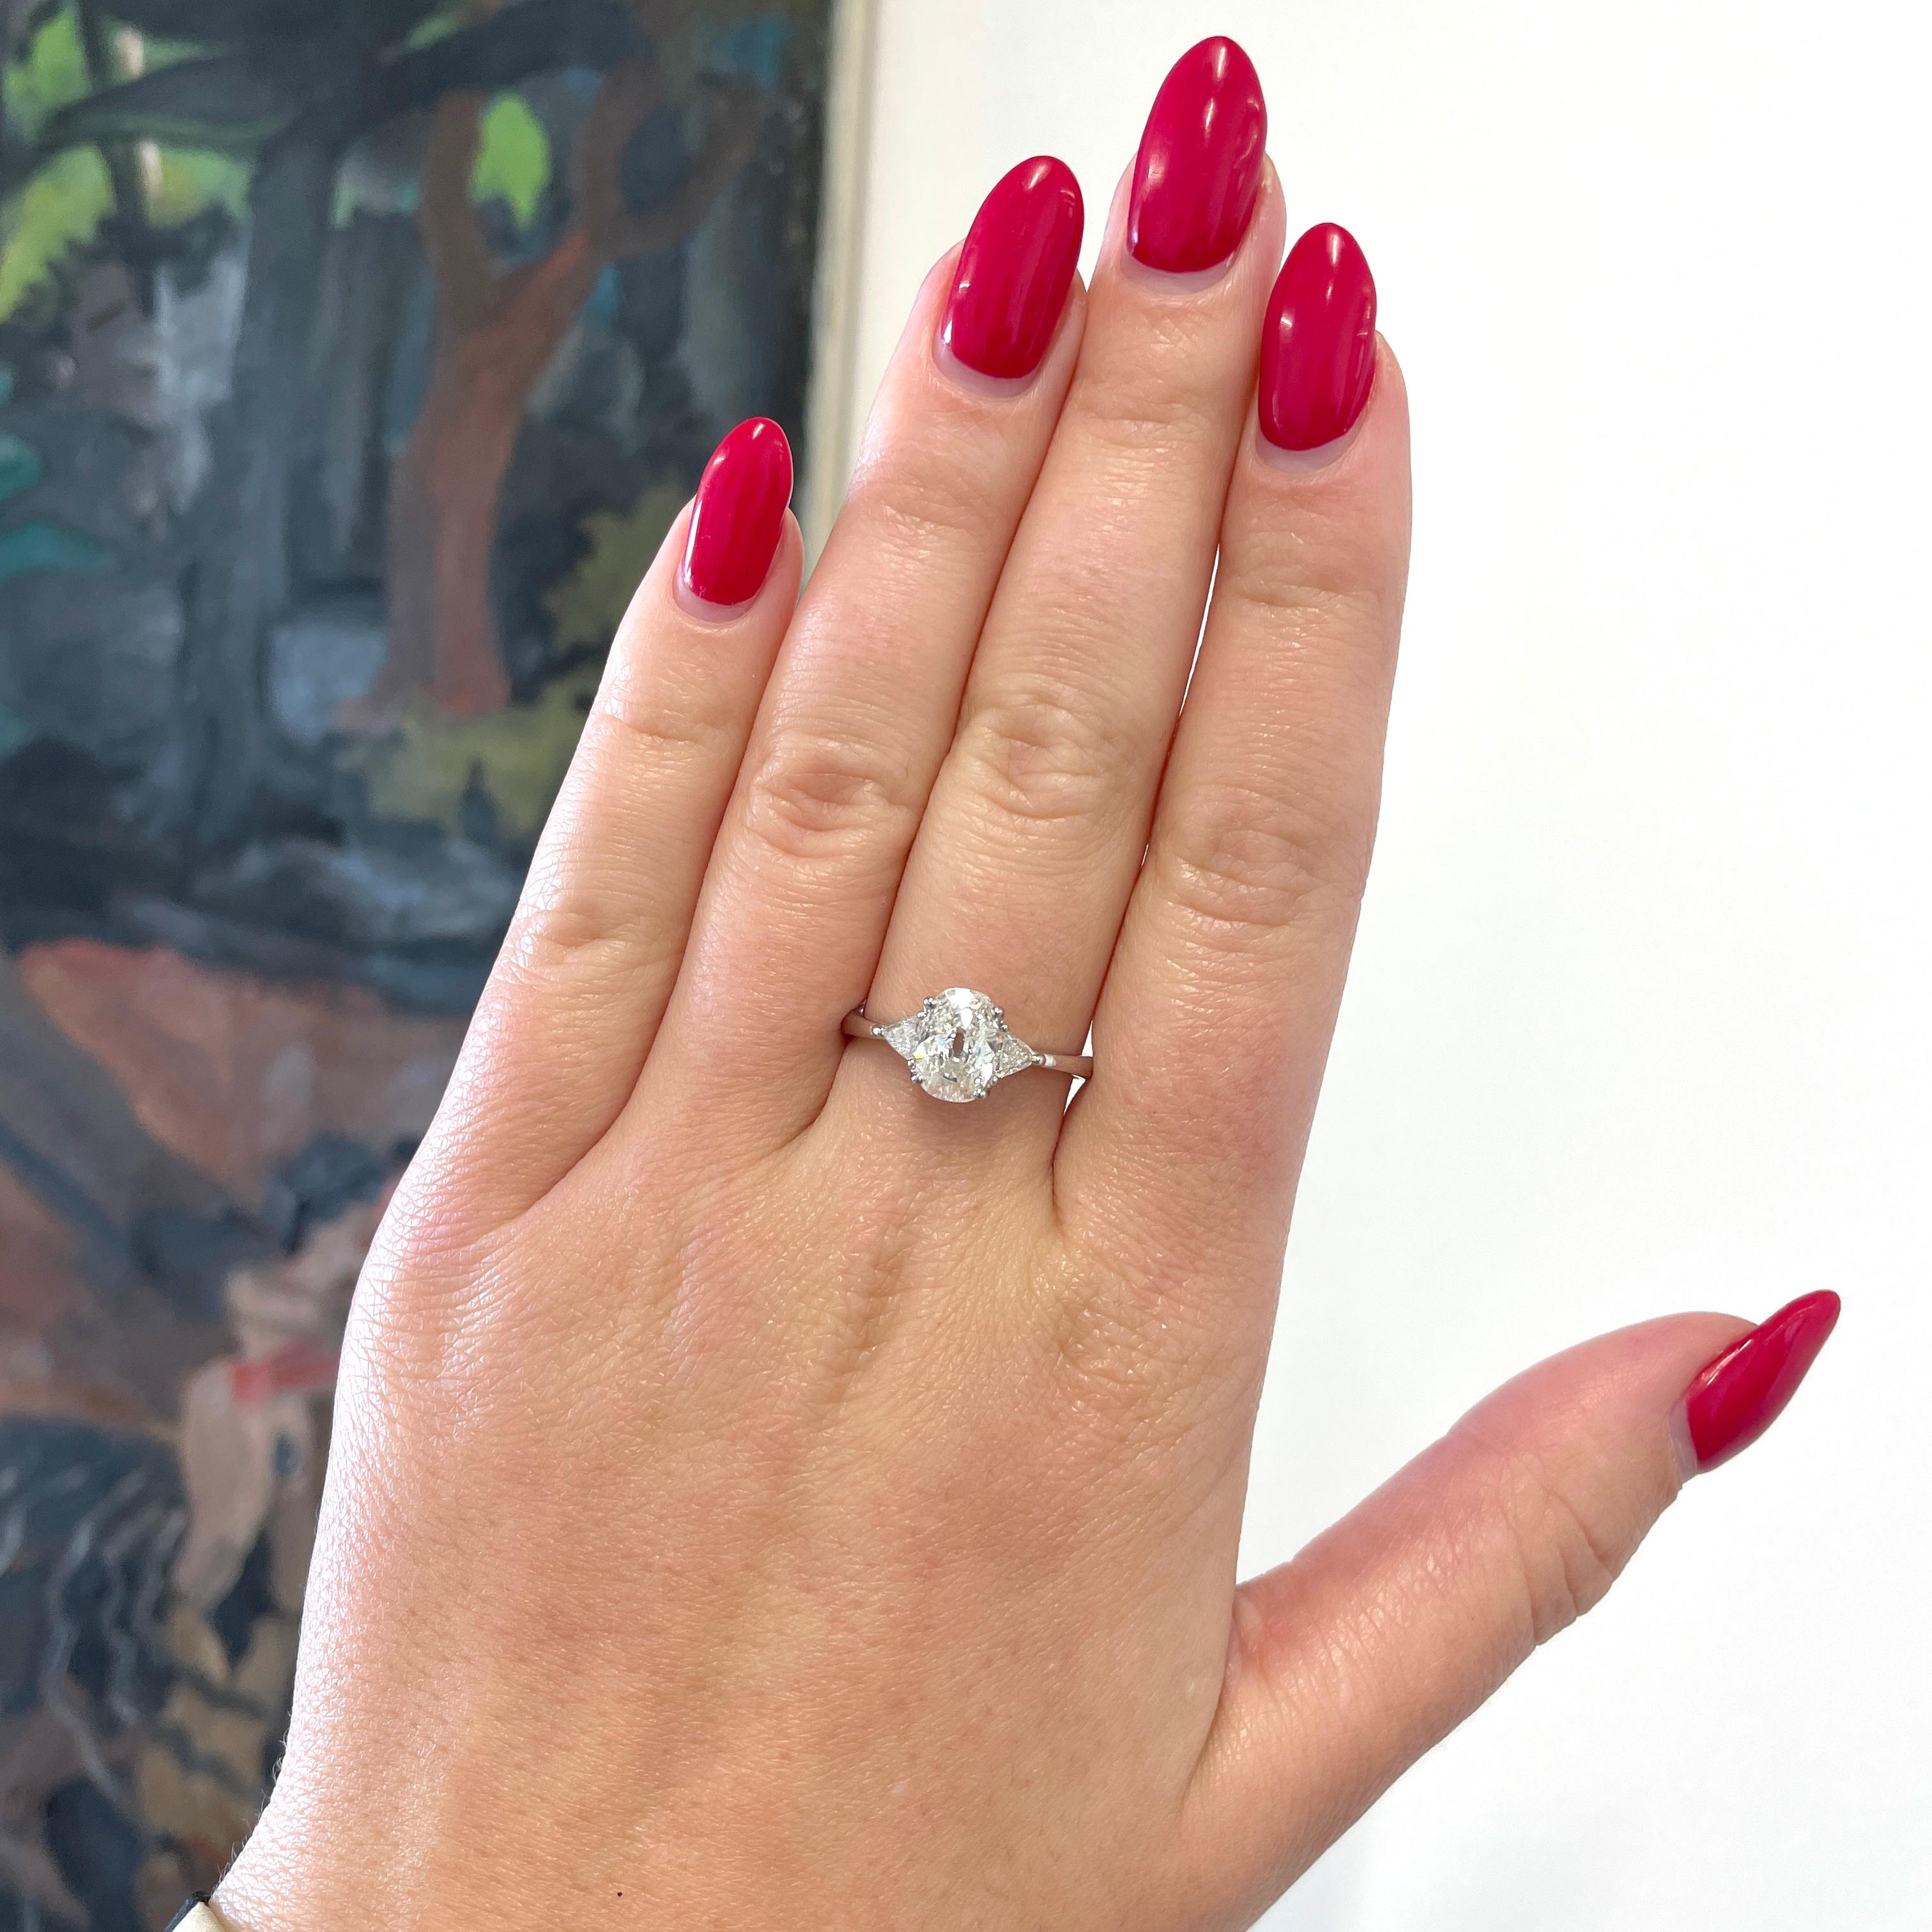 Are you looking for the perfect engagement ring? Consider this Vintage GIA 1.51 carat Antique Cushion Cut Platinum Engagement Ring. Gorgeous, timeless and classic, this engagement ring is truly a dream! 

The center diamond is GIA certified antique